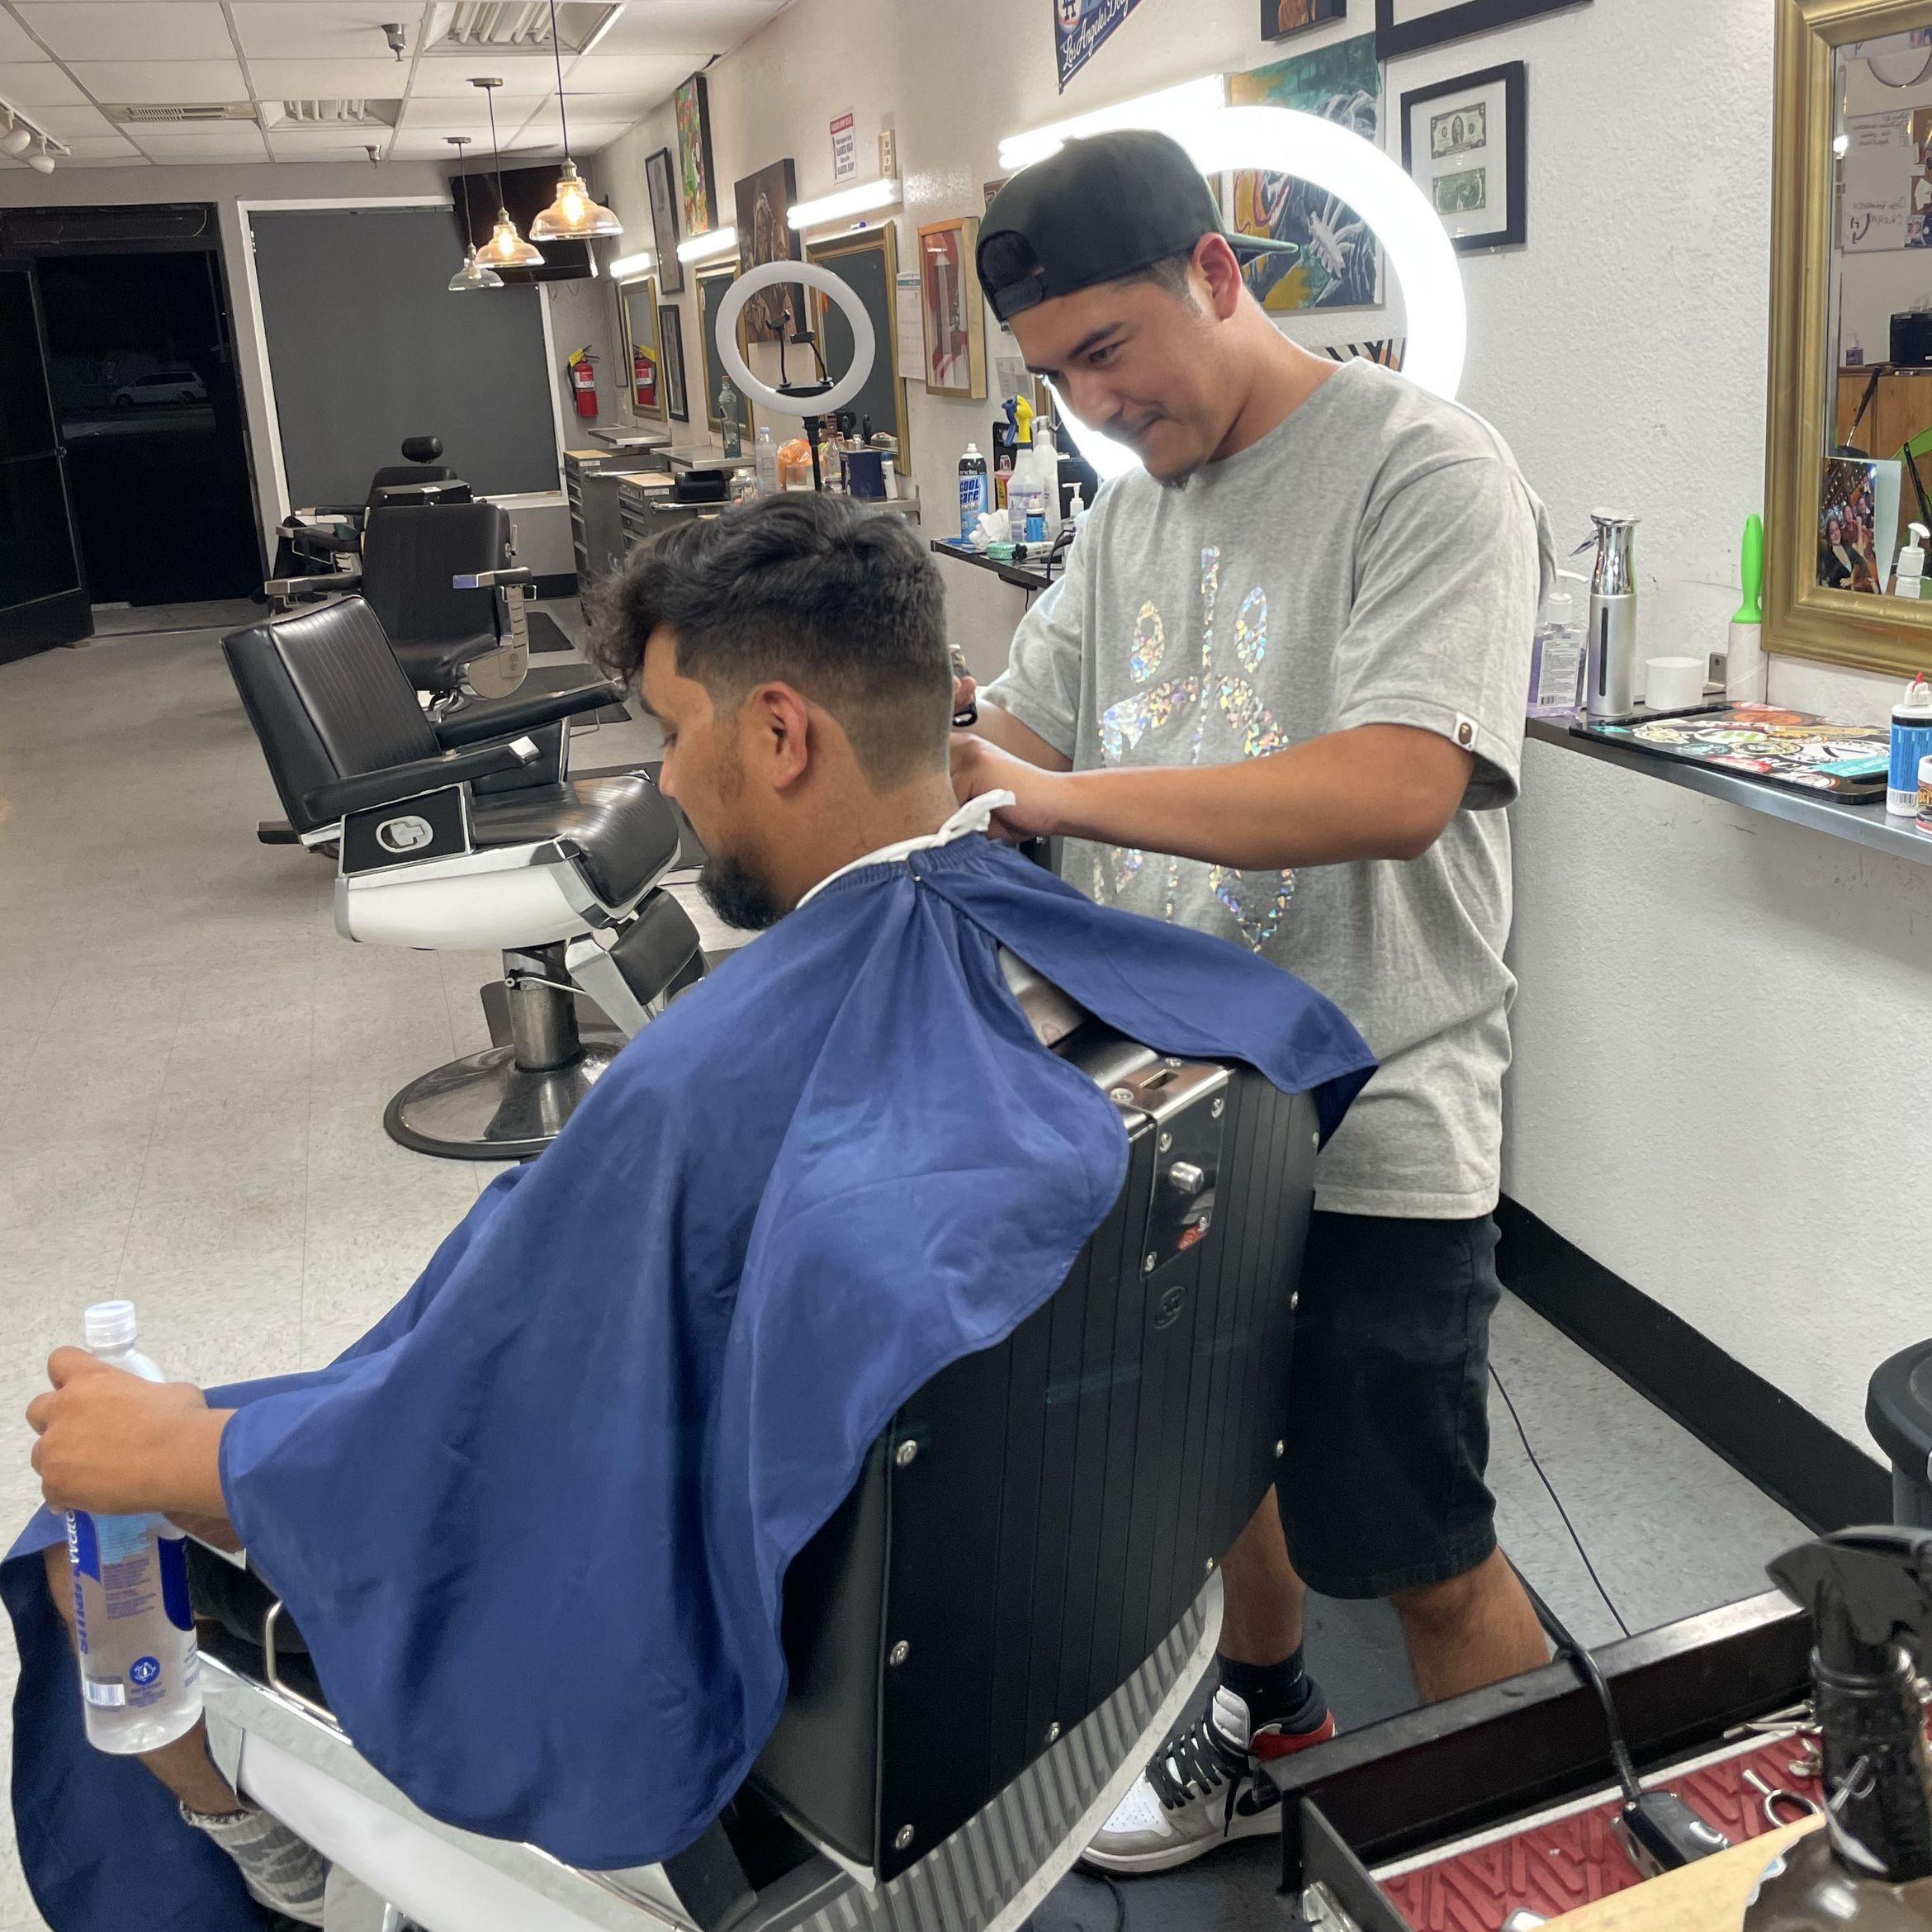 Raul The Barber, 418 Carpenter Rd. SE., Lacey, 98503